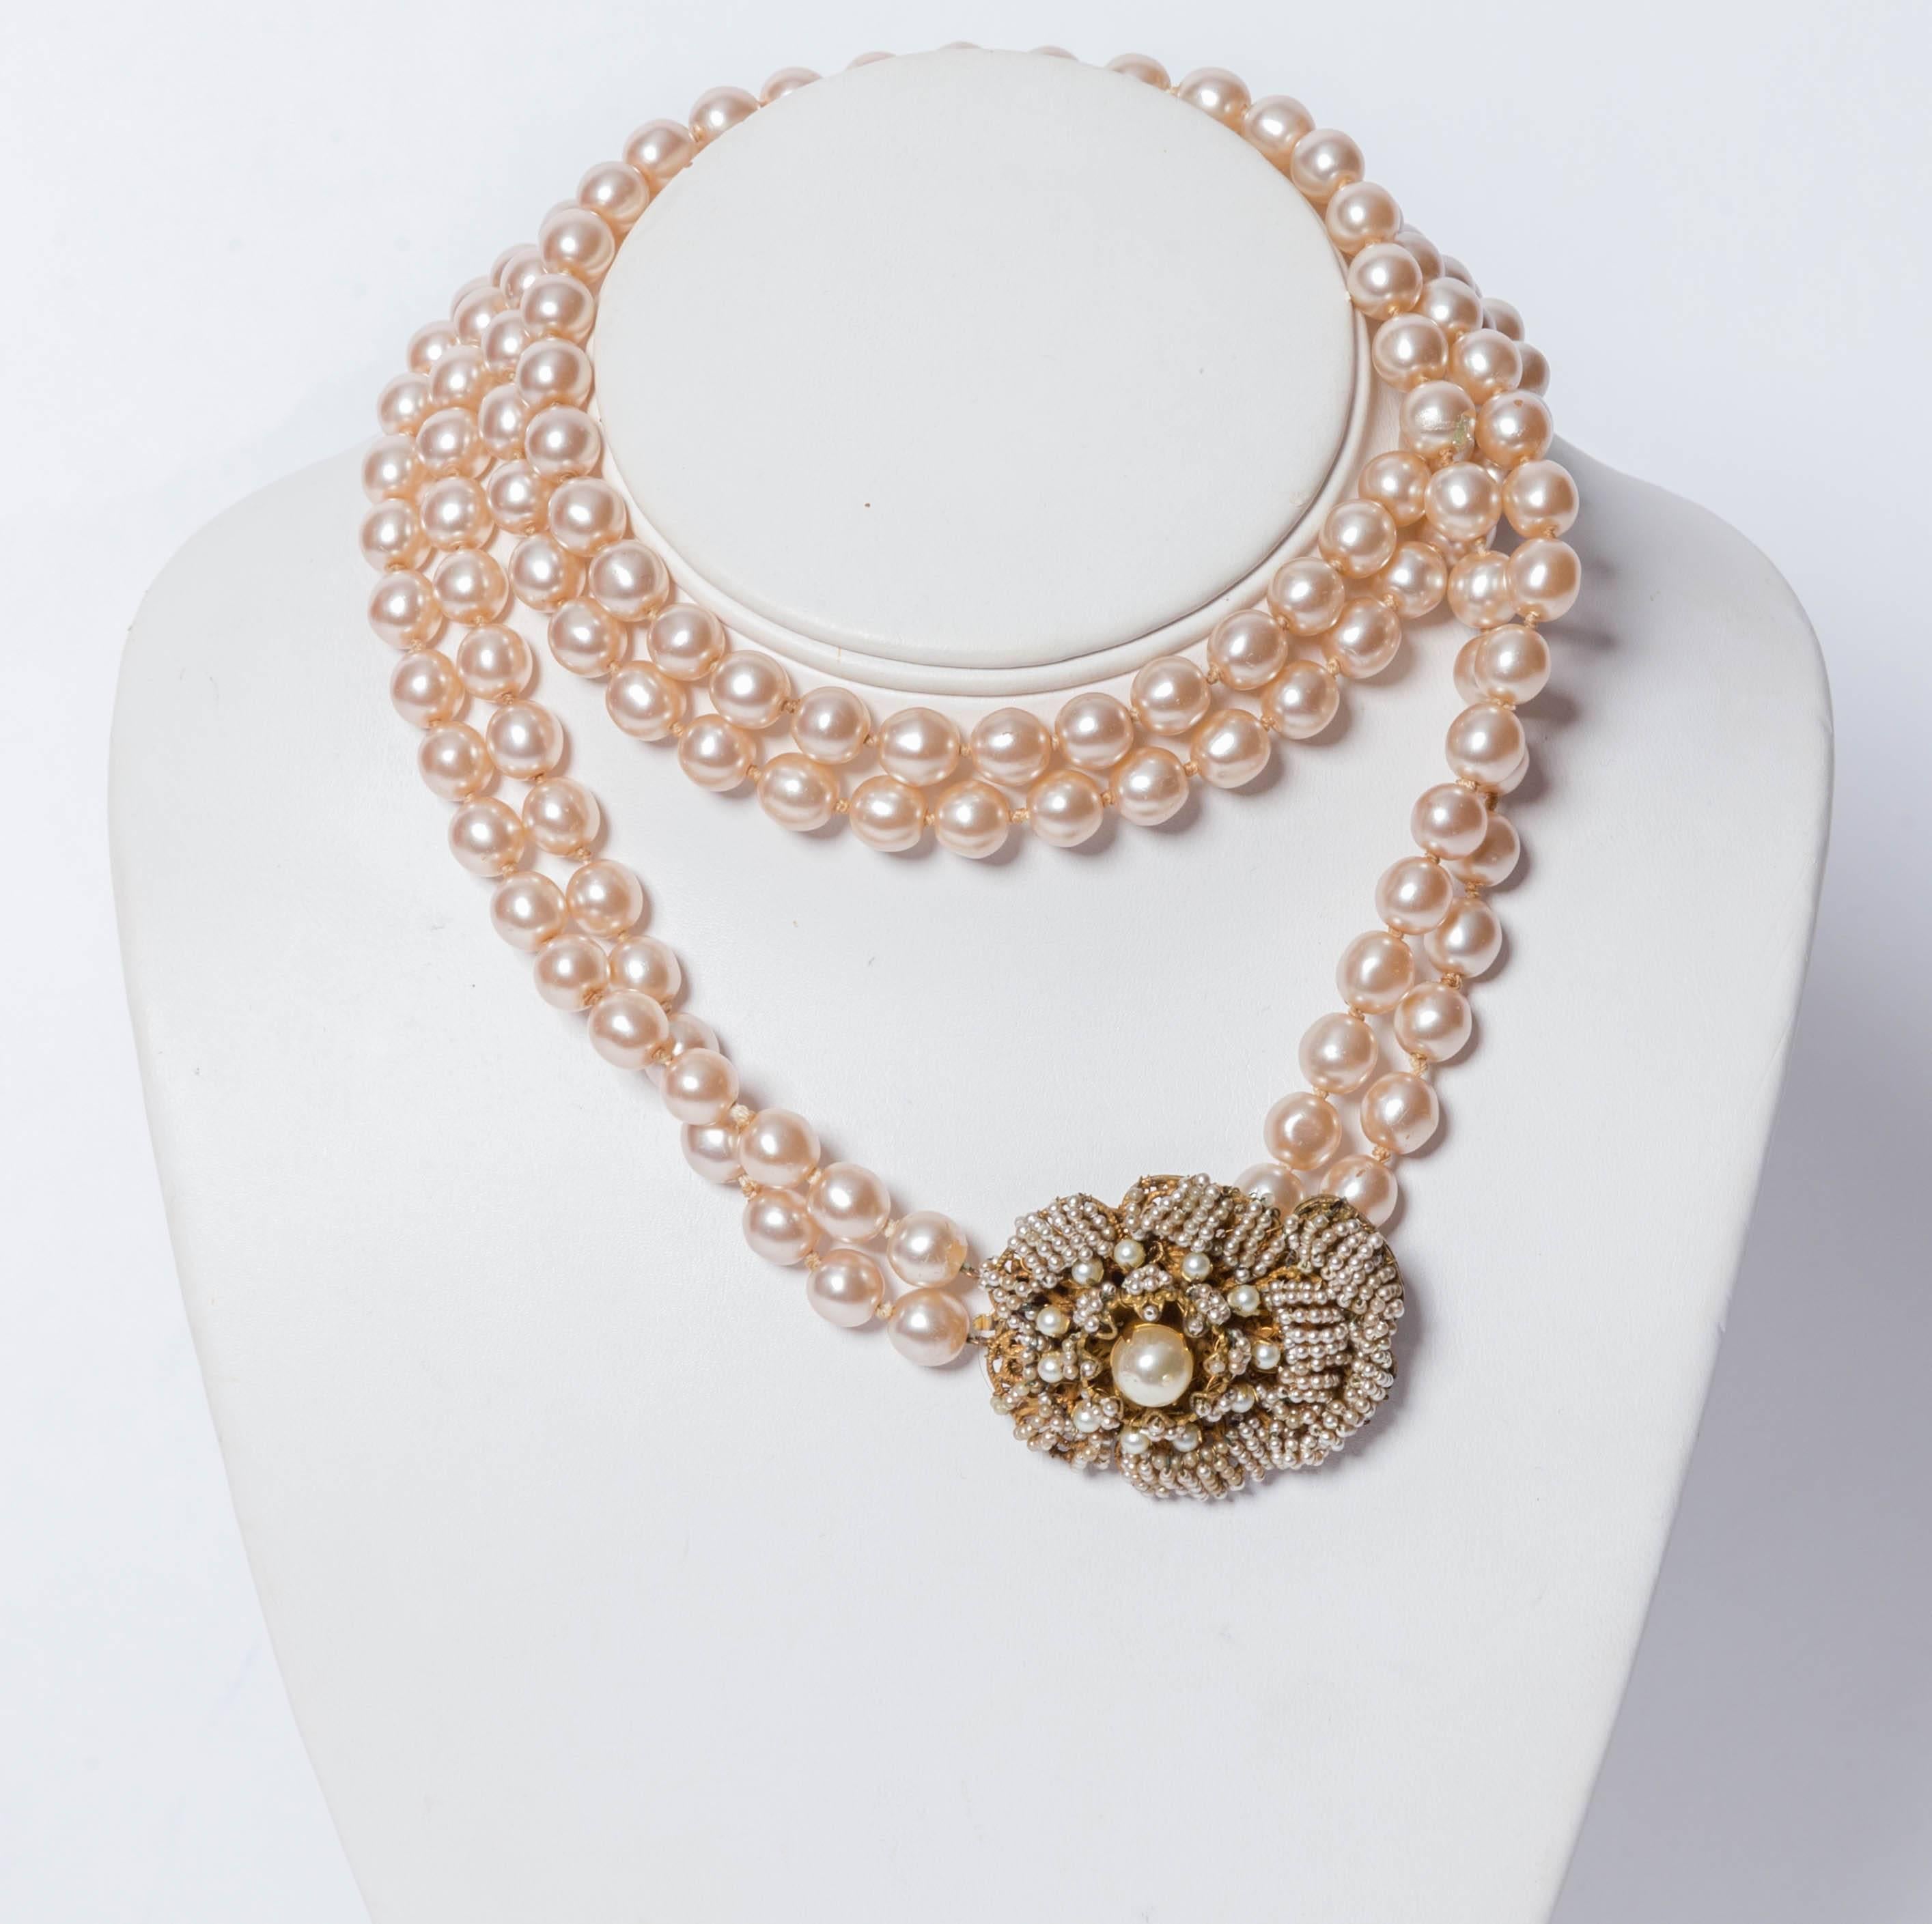 Vintage Miriam Haskell Double Rope Pearl Necklace with Seed Pearl Clasp
Condition is excellent.
Clasp measures 1.5 x 1.75 inches.
Rope drop 14 inches 